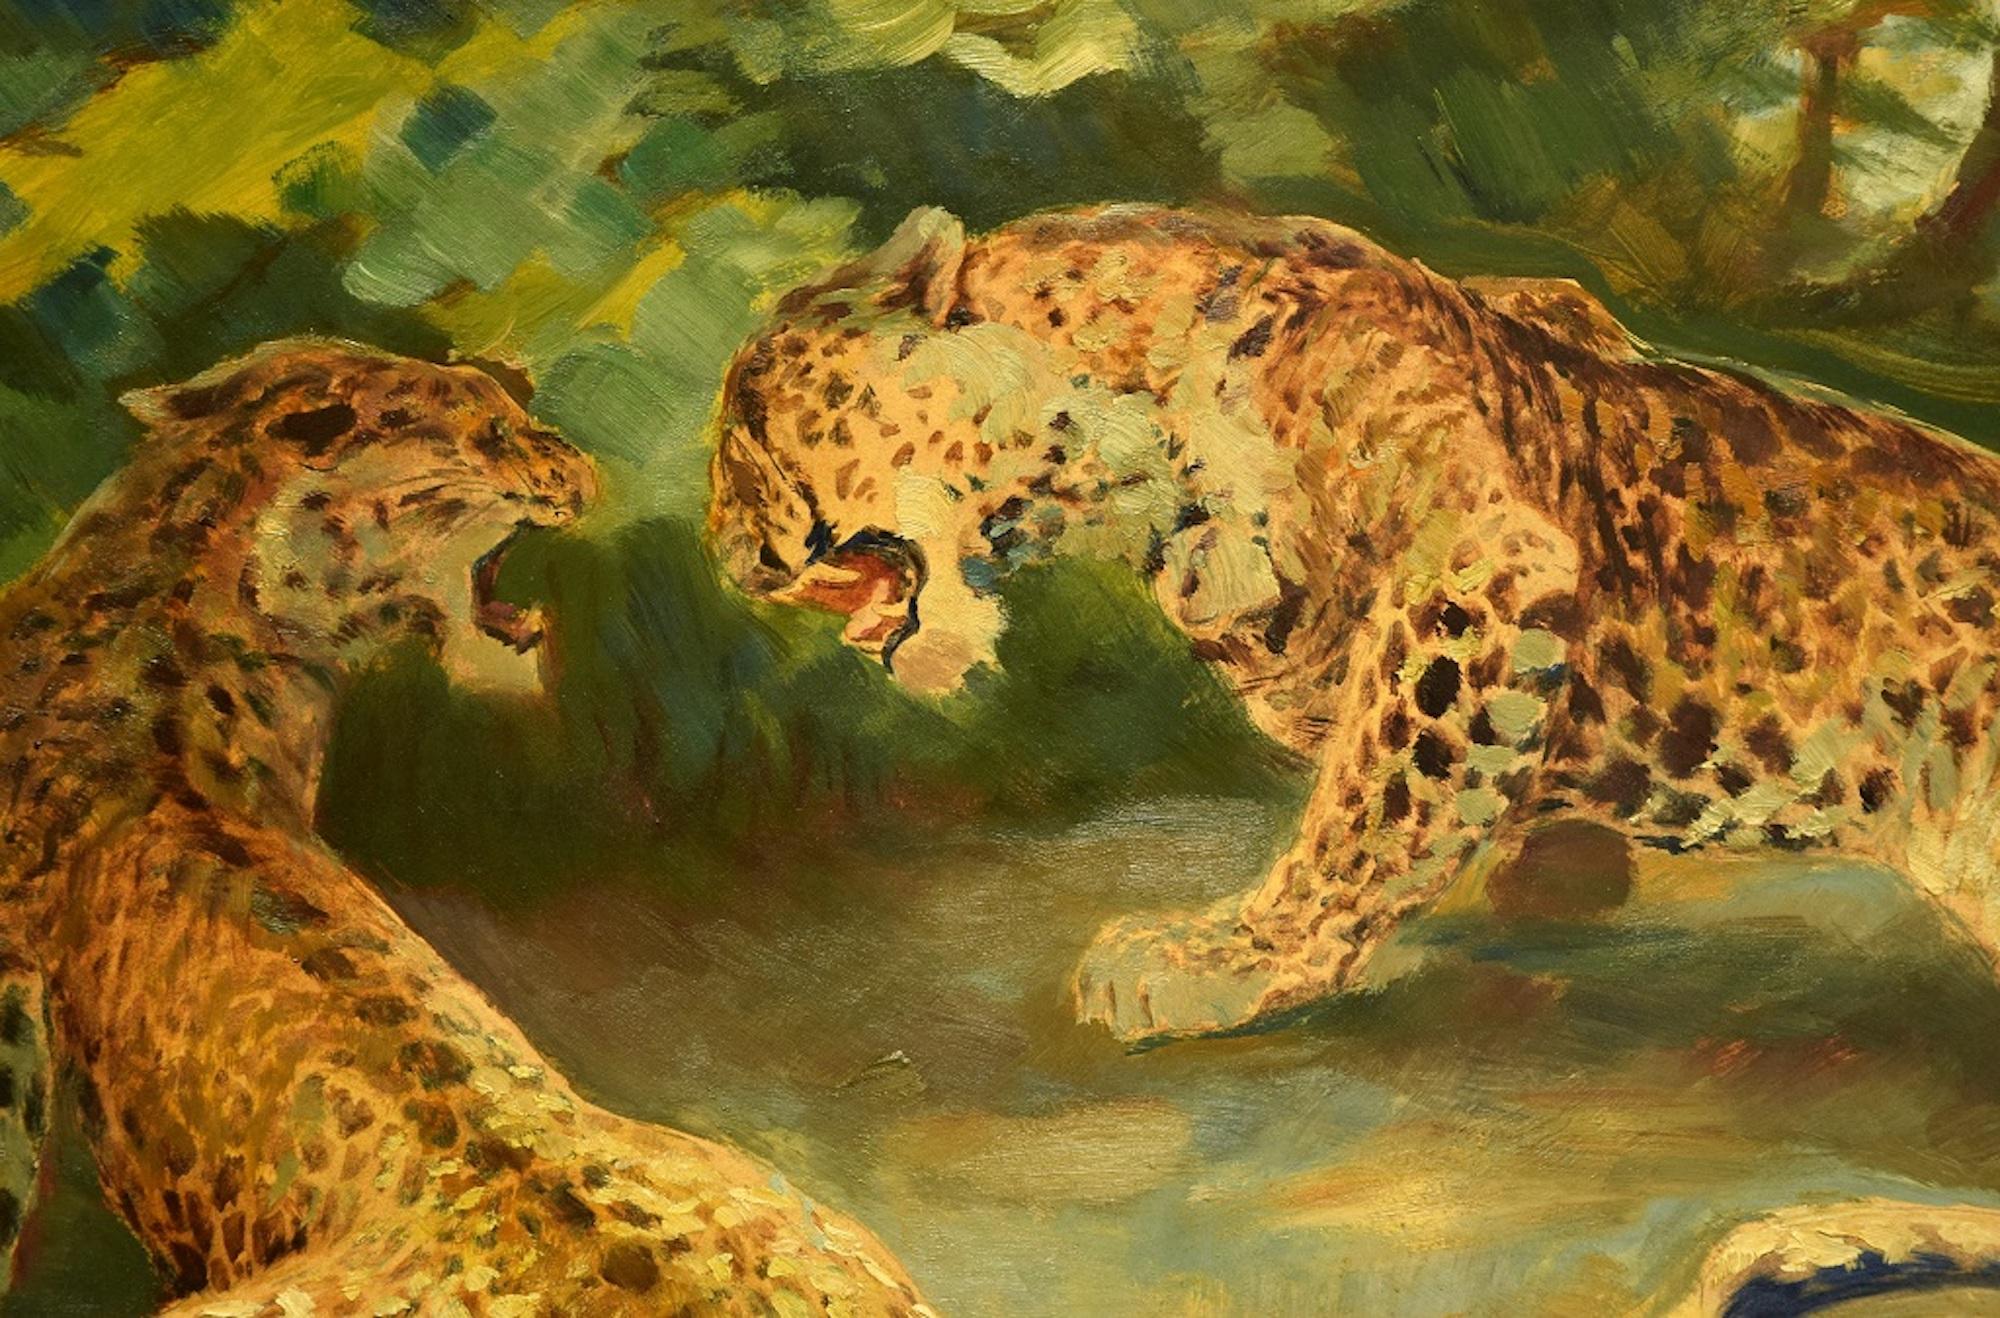 Playing Leopards - Original Oil on Canvas by F. Schebeck - Early 1900 - Painting by Ferdinand Schebeck